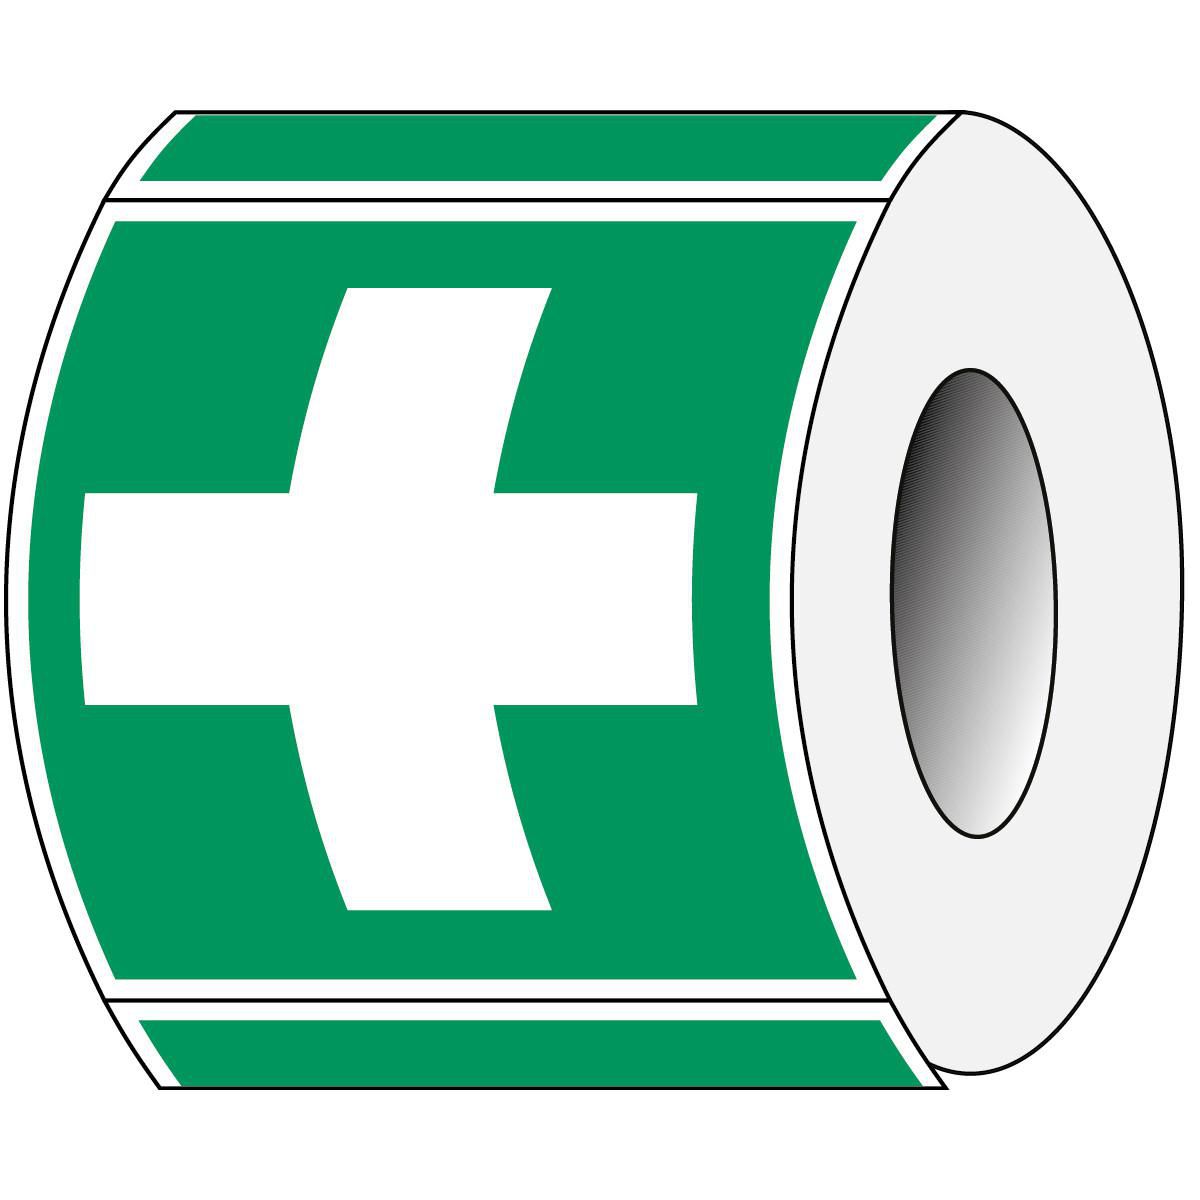 Brady PIC E003-100X100-PE-ROLL1 W128401389 ISO Safety Sign - First aid 